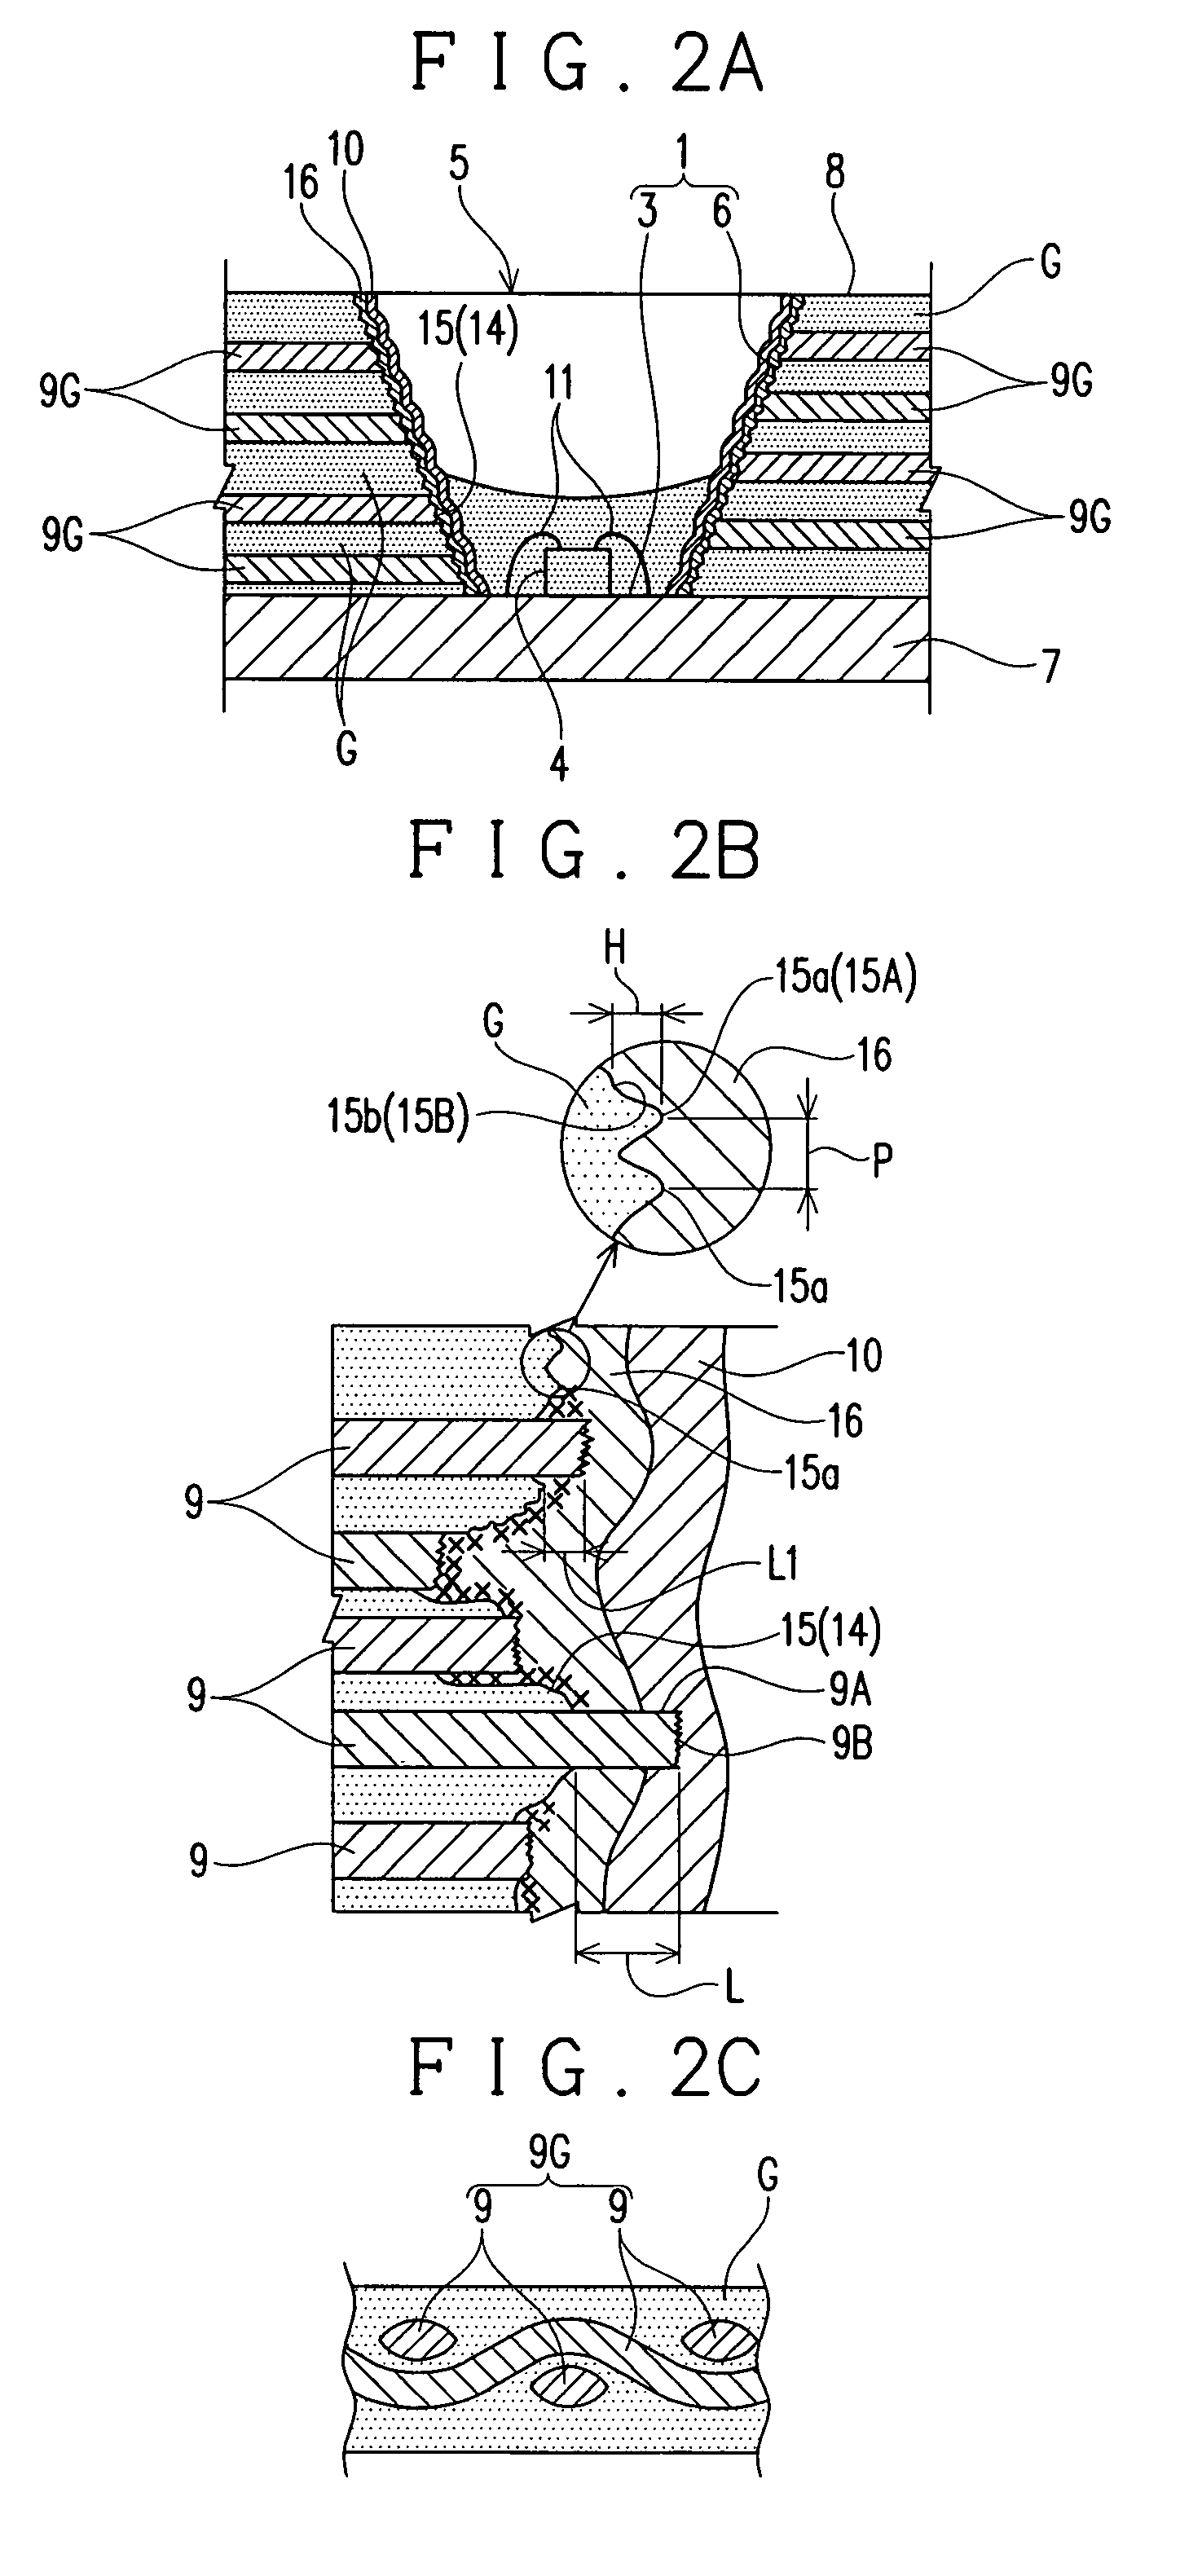 Light emitting device having a package formed with fibrous fillers